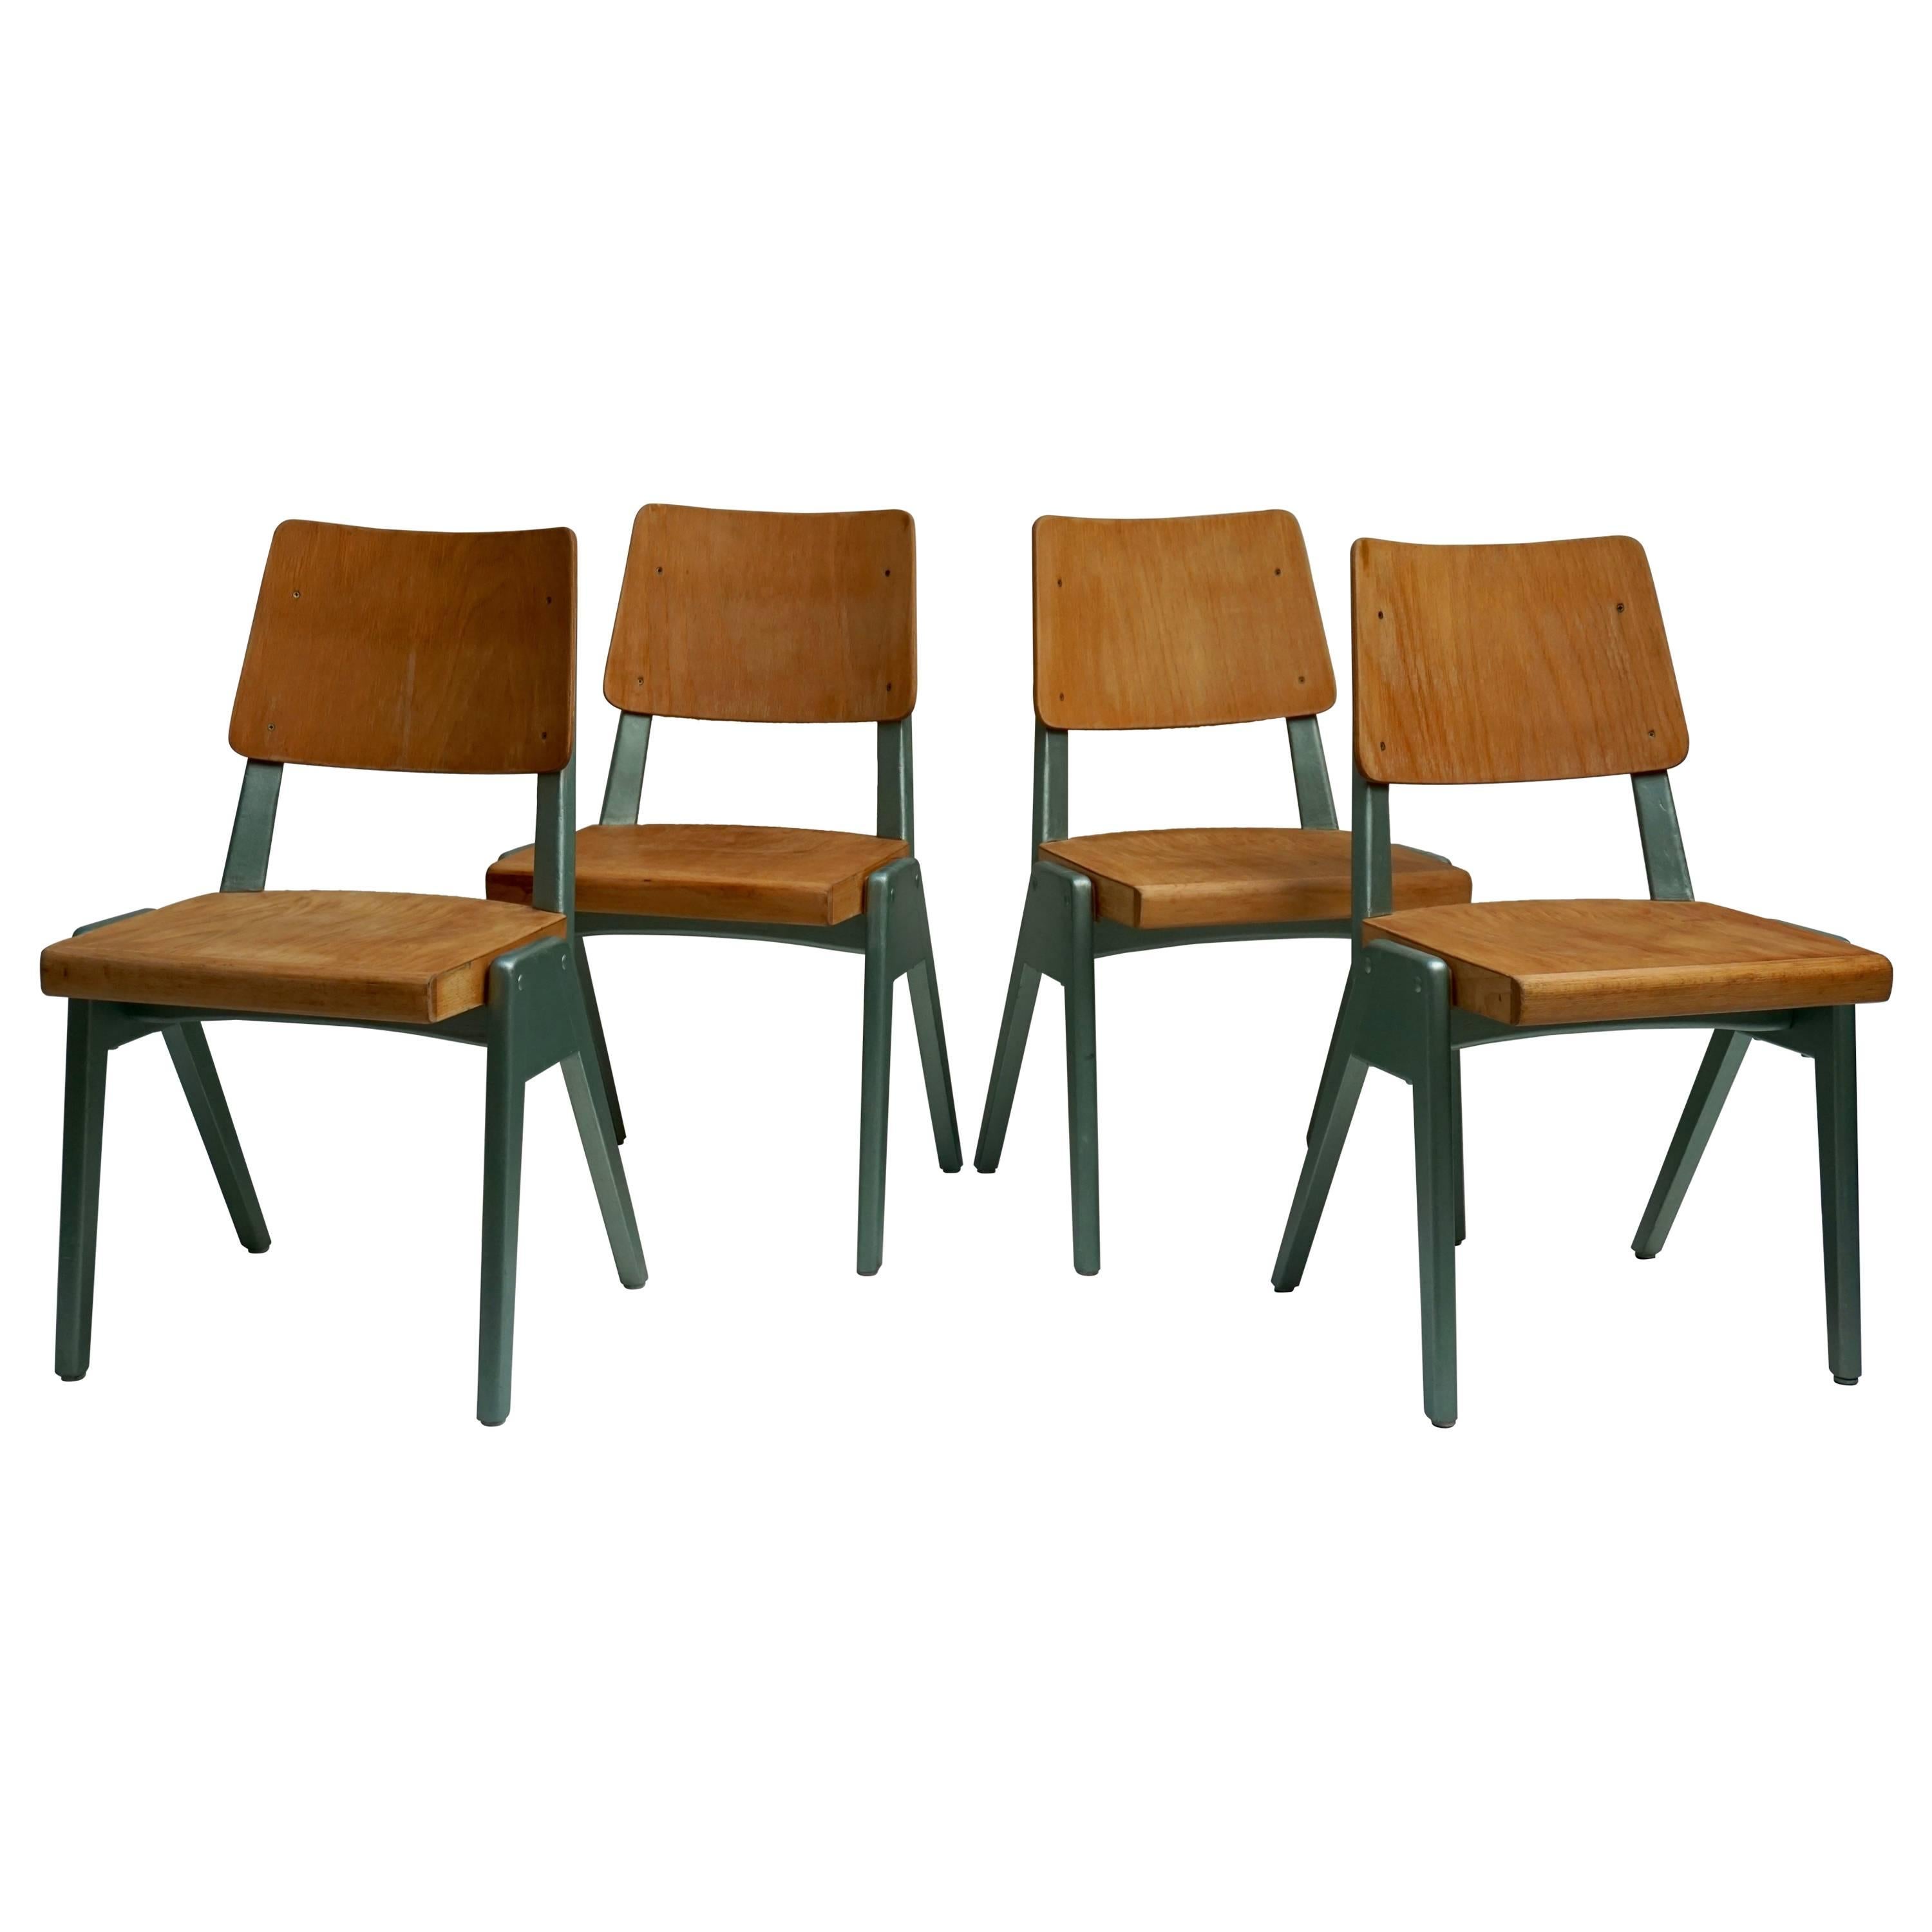 Four Plywood Dining Chairs For Sale